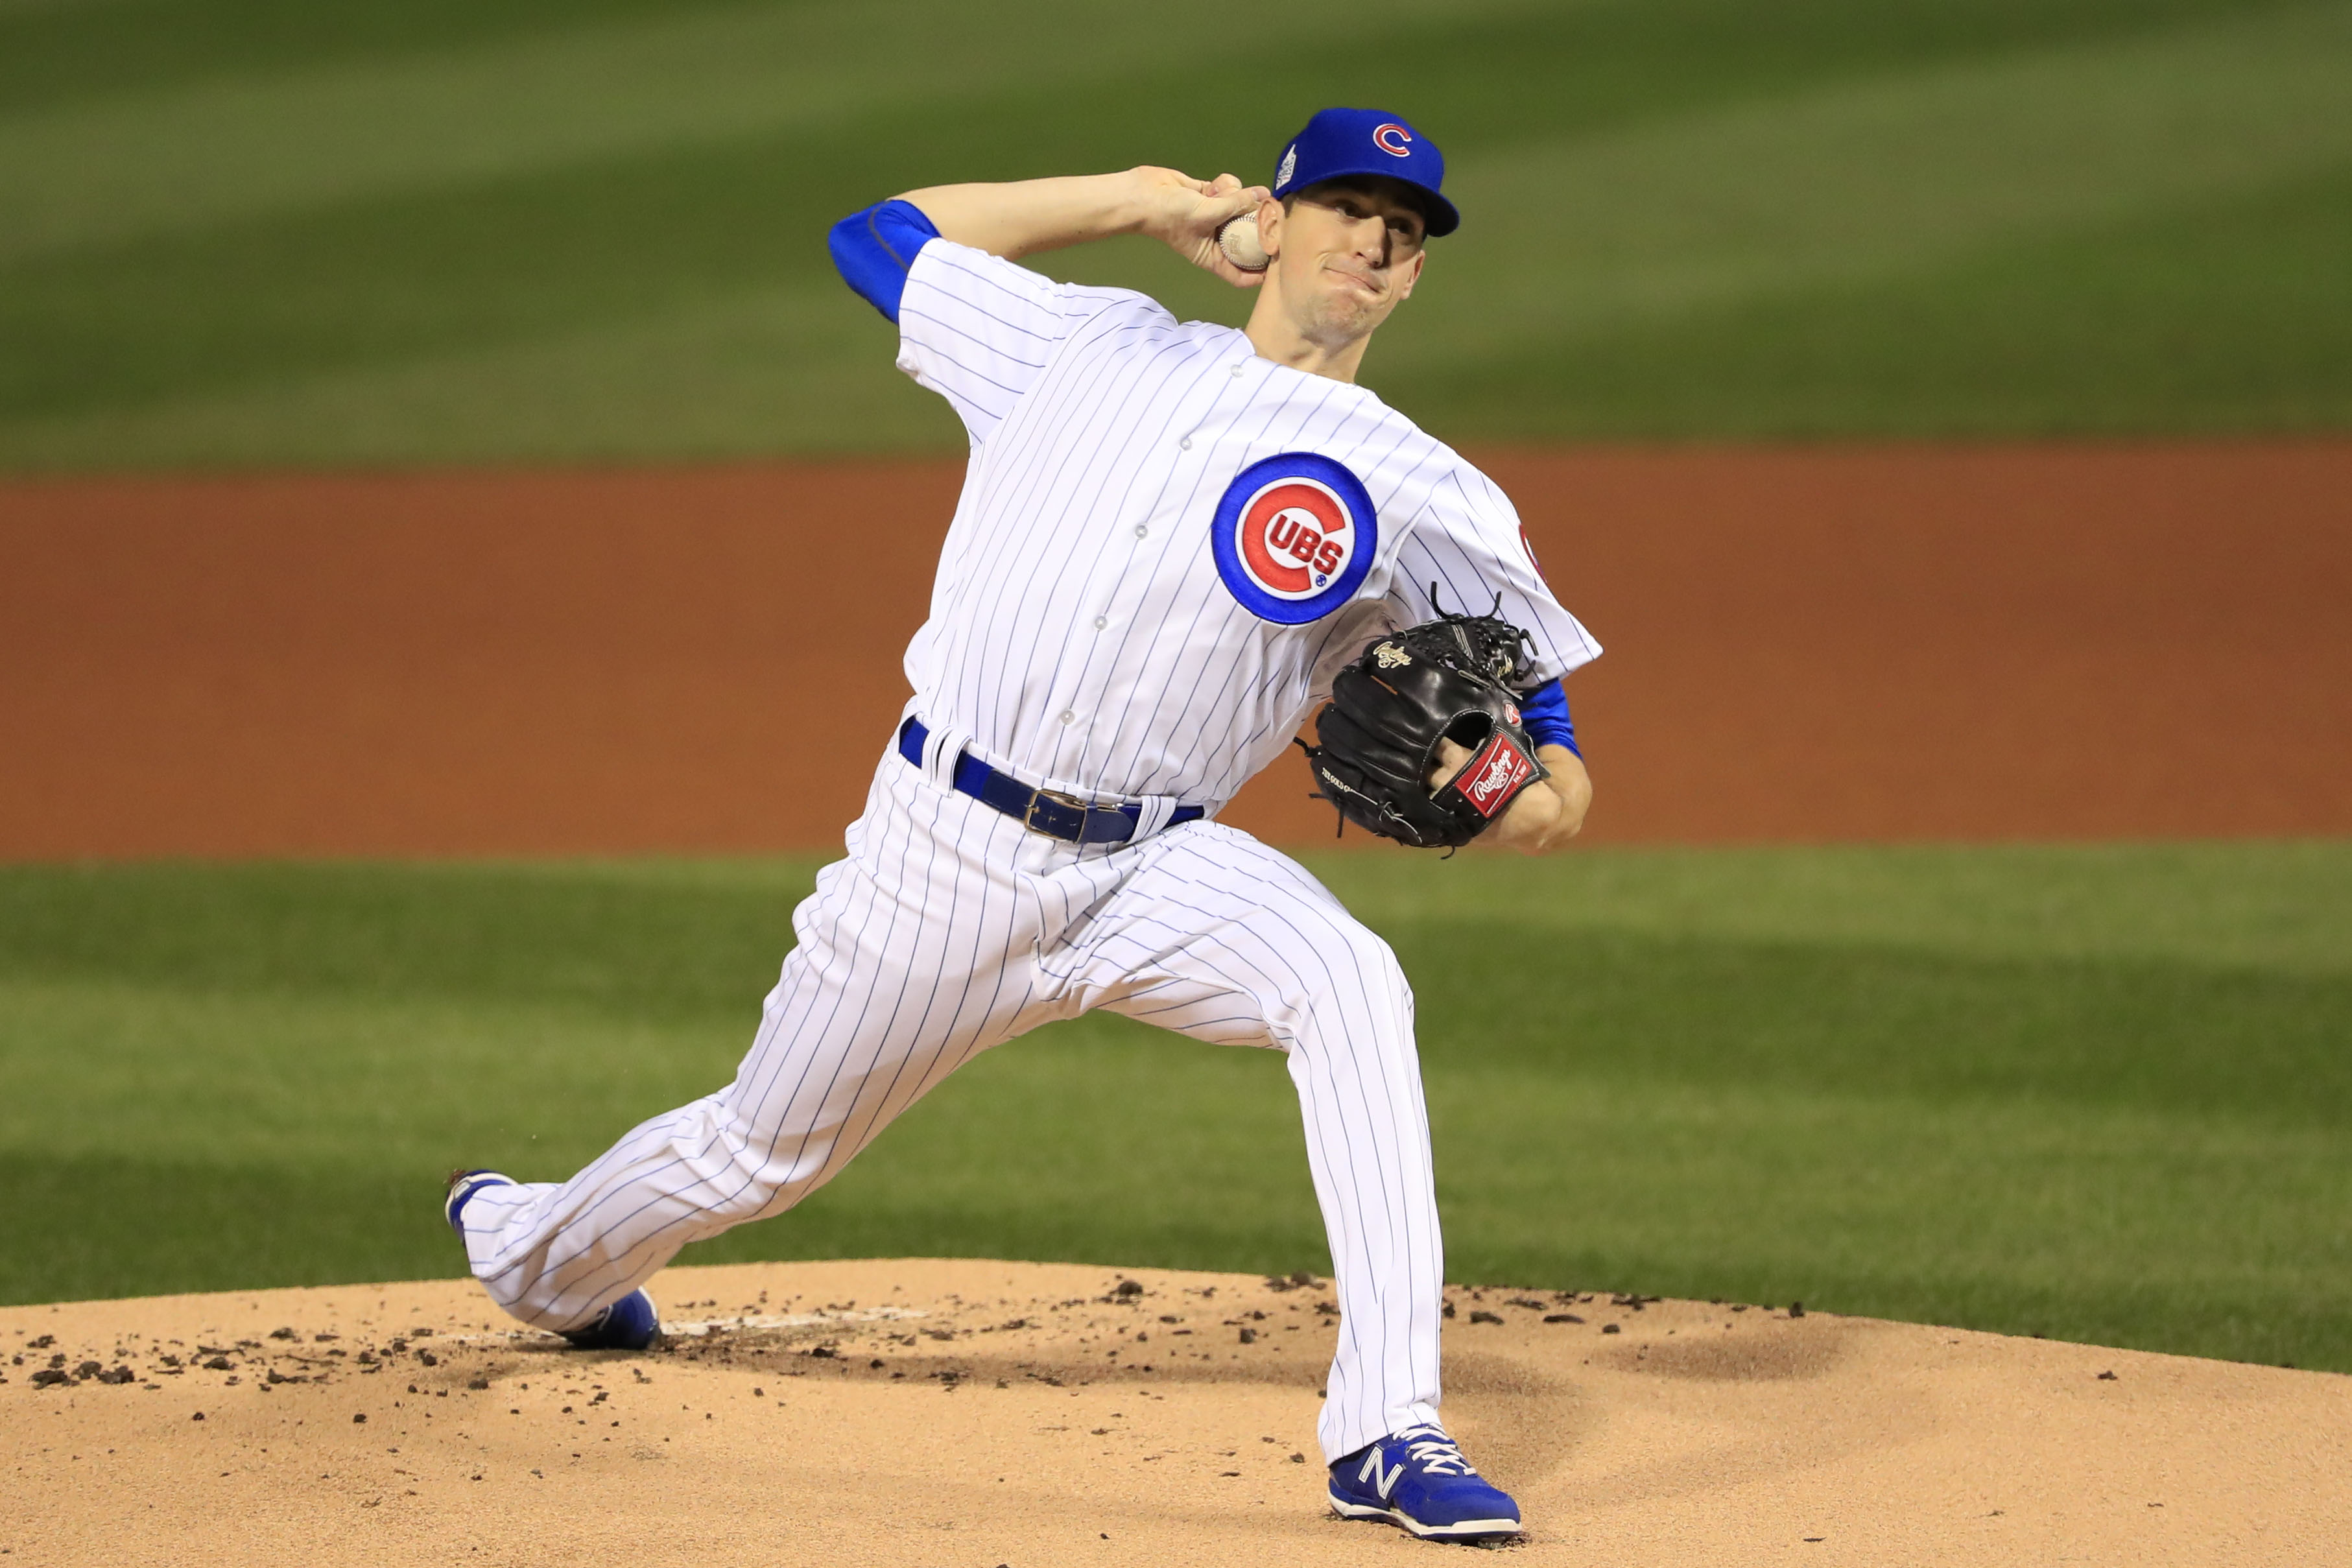 Chicago Cubs: Cubs look to win another series as Pirates invade Wrigley - Cubbies Crib